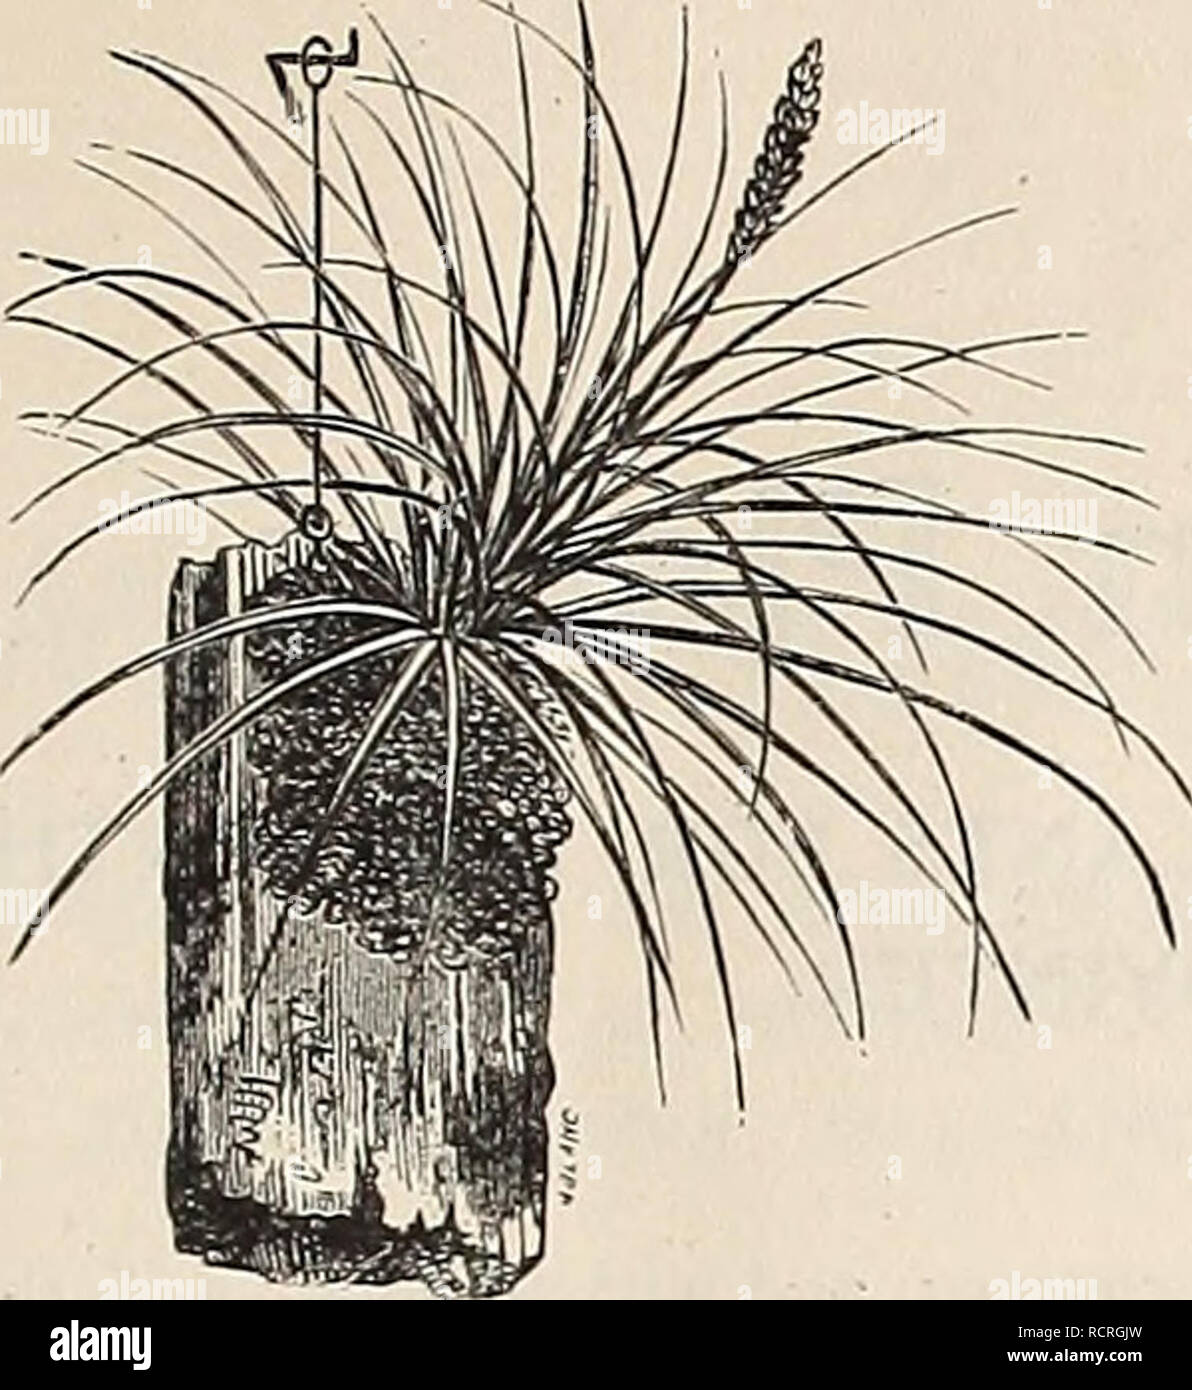 . Descriptive and illustrated catalogue and manual of Royal Palm Nurseries. Nurseries (Horticulture), Florida, Catalogs; Tropical plants, Catalogs; Fruit trees, Seedlings, Catalogs; Citrus fruit industry, Catalogs; Fruit, Catalogs; Plants, Ornamental, Catalogs. TiLLANDSIAS AND SUCCULENTS. 45. Tillandsia bracleata. TILLAHDSIA, continued. grow on for years, the old plants dying away after tliey bloom, and the young plants coming from the base.&quot; T. Bartramii. A small, neat species, with bril- liant red bracts and purple flowers. 25 cents each. T. bracteata. One of the largest Wild Pines or A Stock Photo